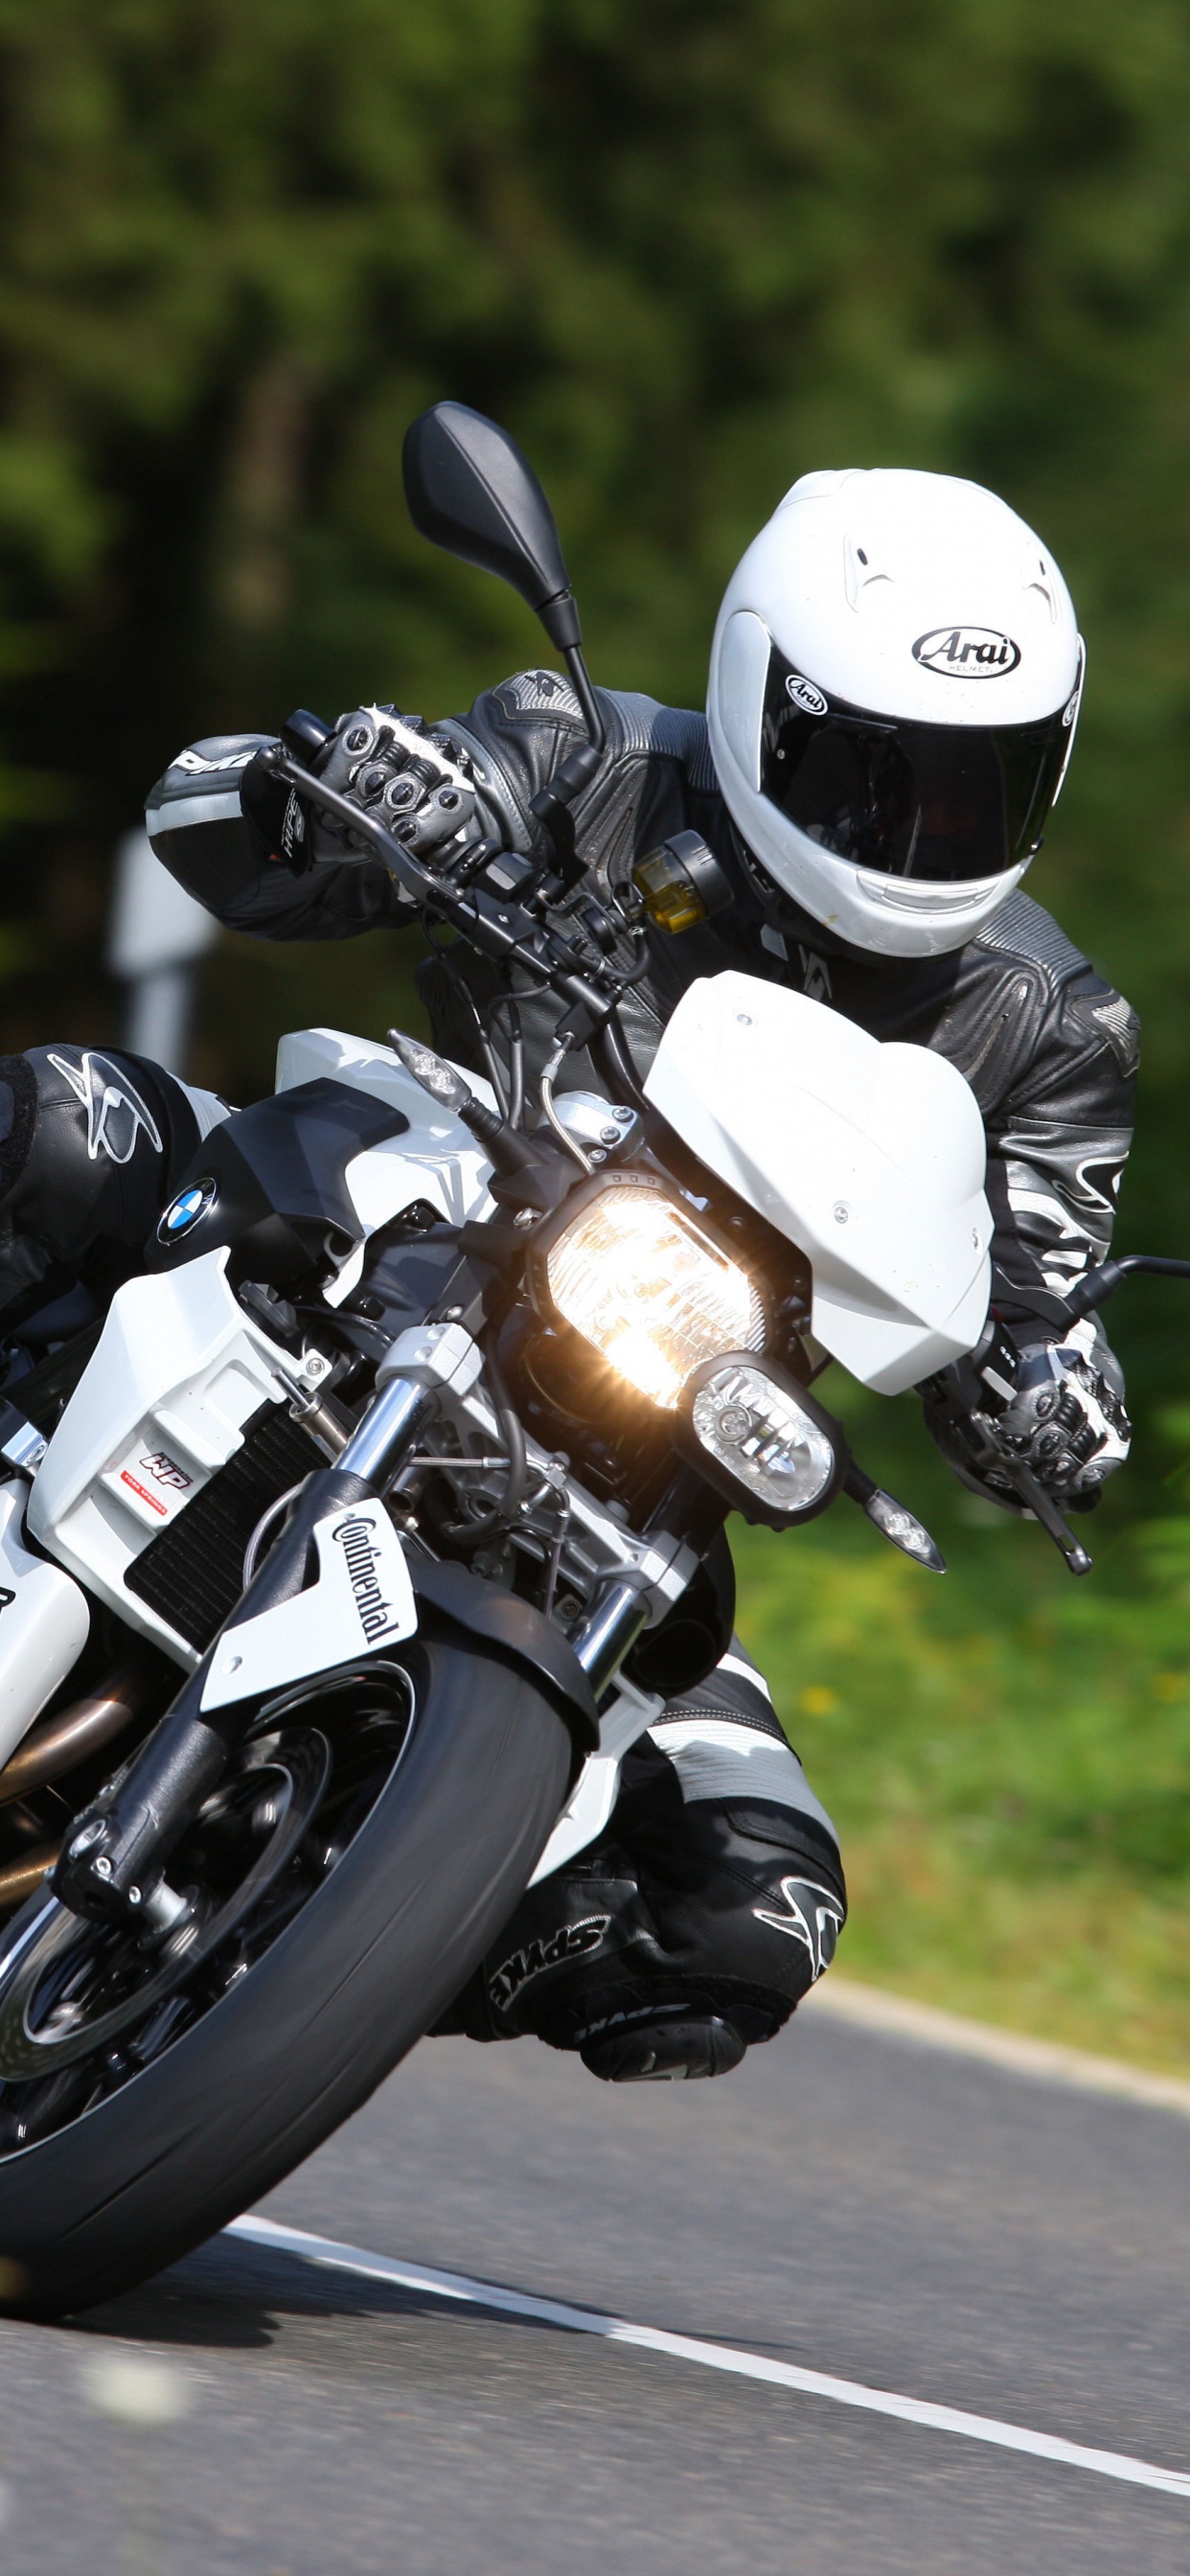 Man in Black Helmet Riding Motorcycle on Road During Daytime. Wallpaper in 1242x2688 Resolution